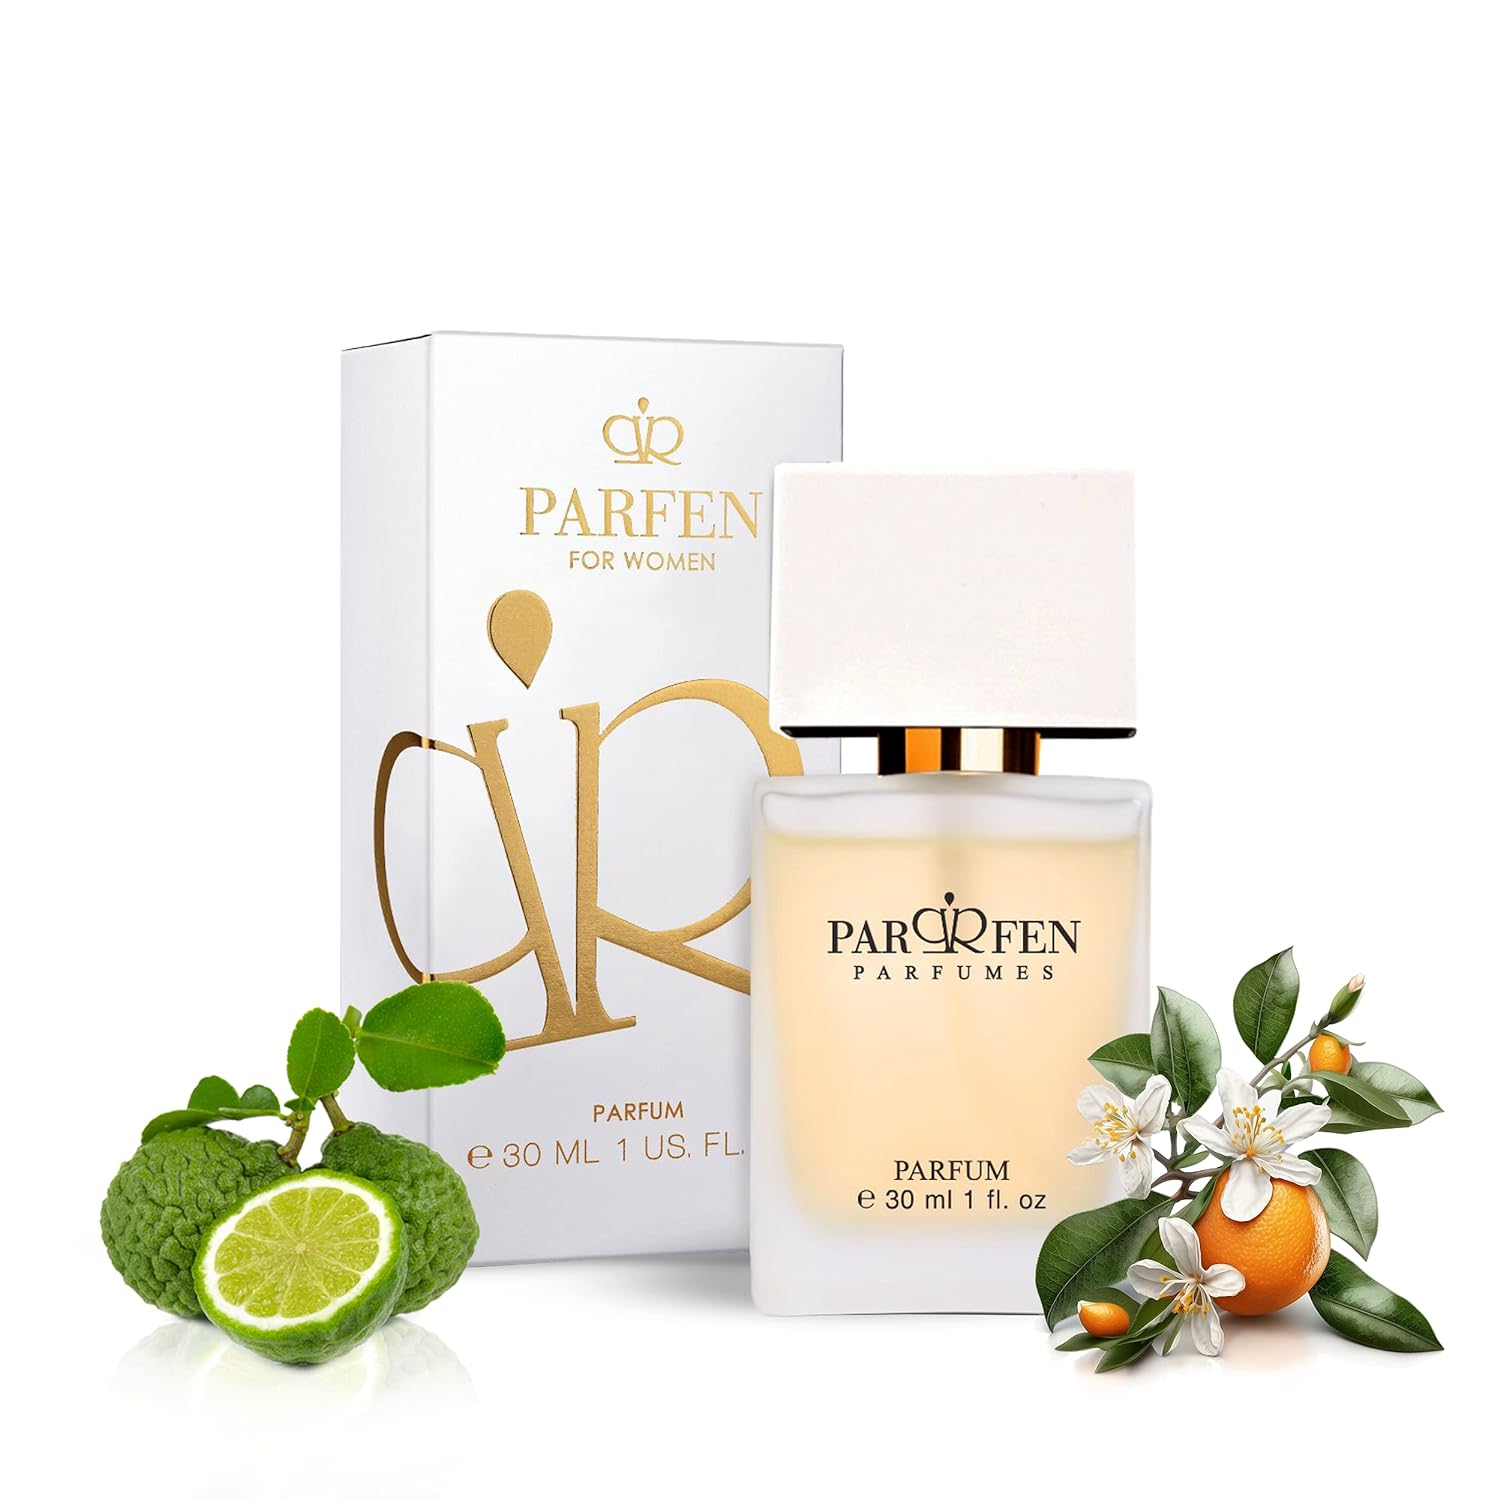 Parfen No. 932 Inspired by My Way for Women, 1x 30 ml, Perfume Dupe